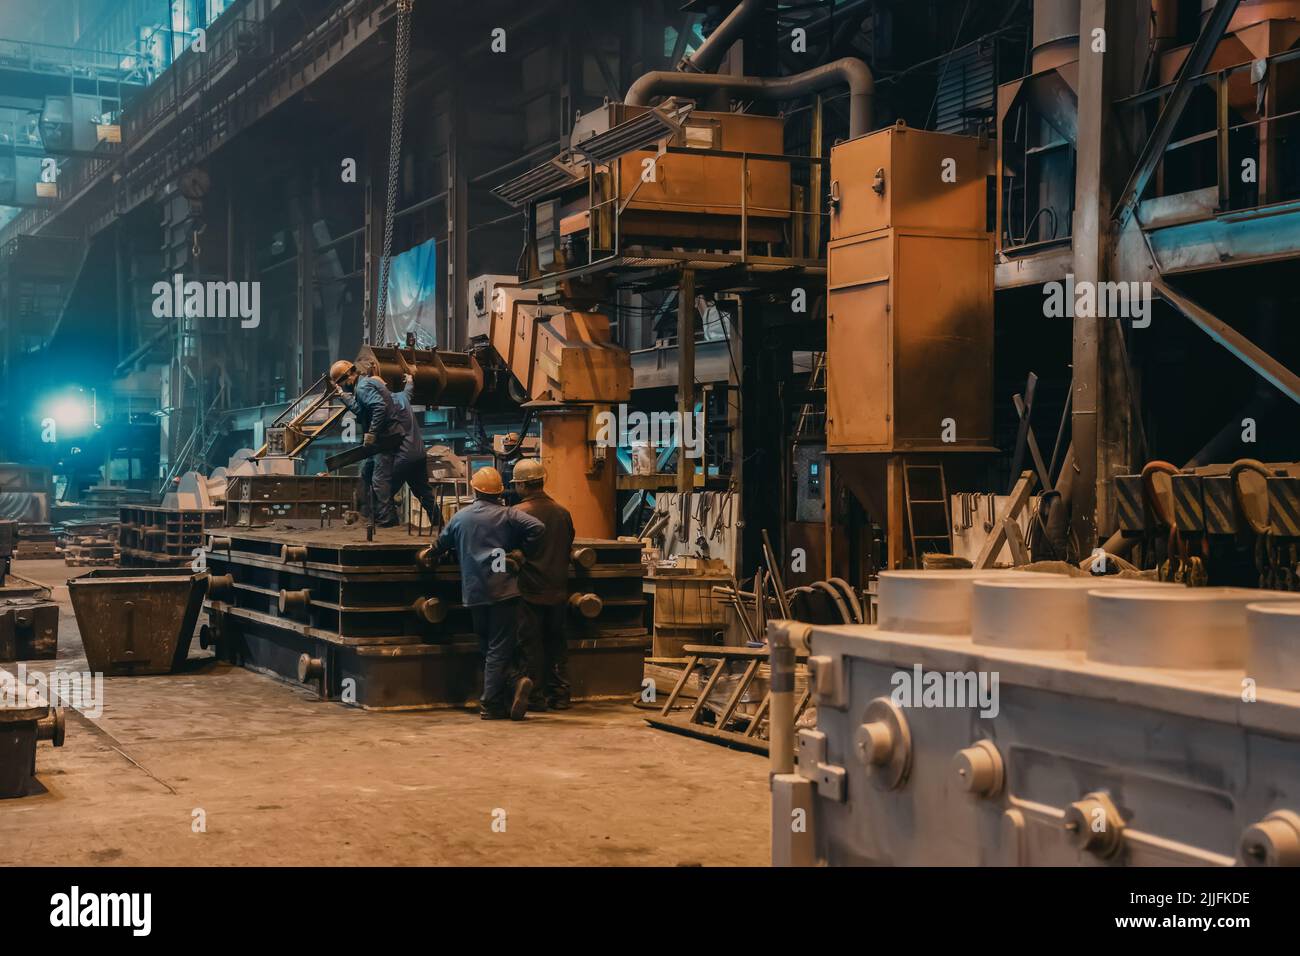 Metallurgical plant large hall inside. Industrial steel production factory. Interior of metallurgical workshop. Heavy industry foundry. Stock Photo